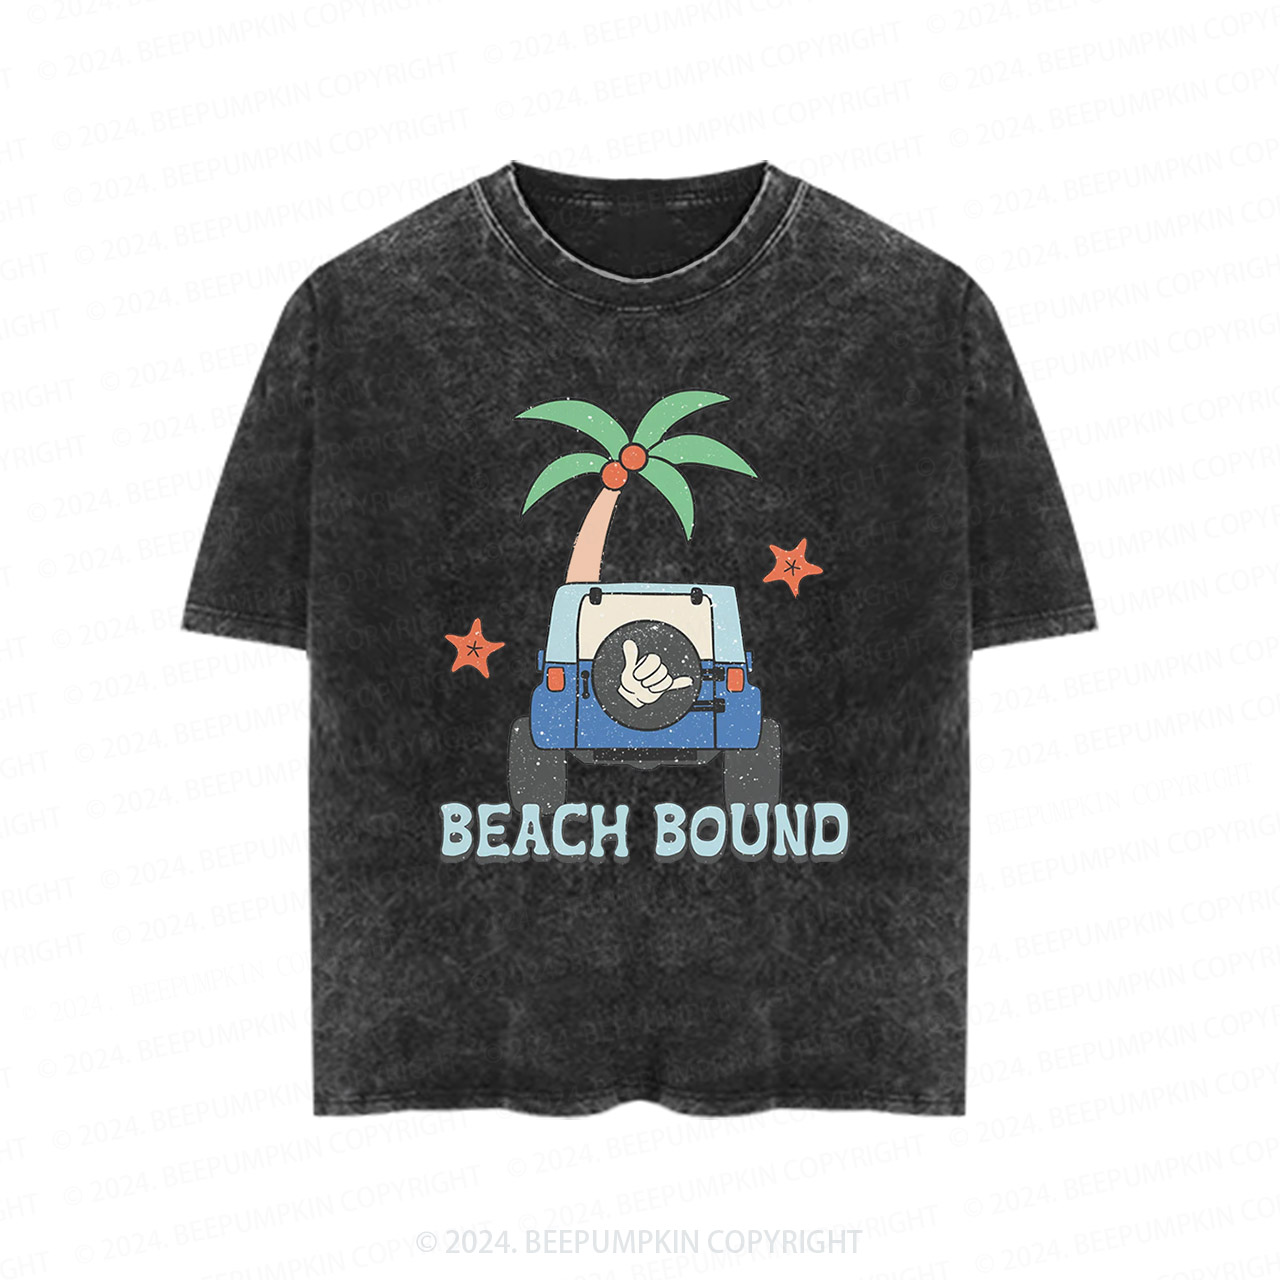 Beach Bound Car And Tree Toddler&Kids Washed Tees         